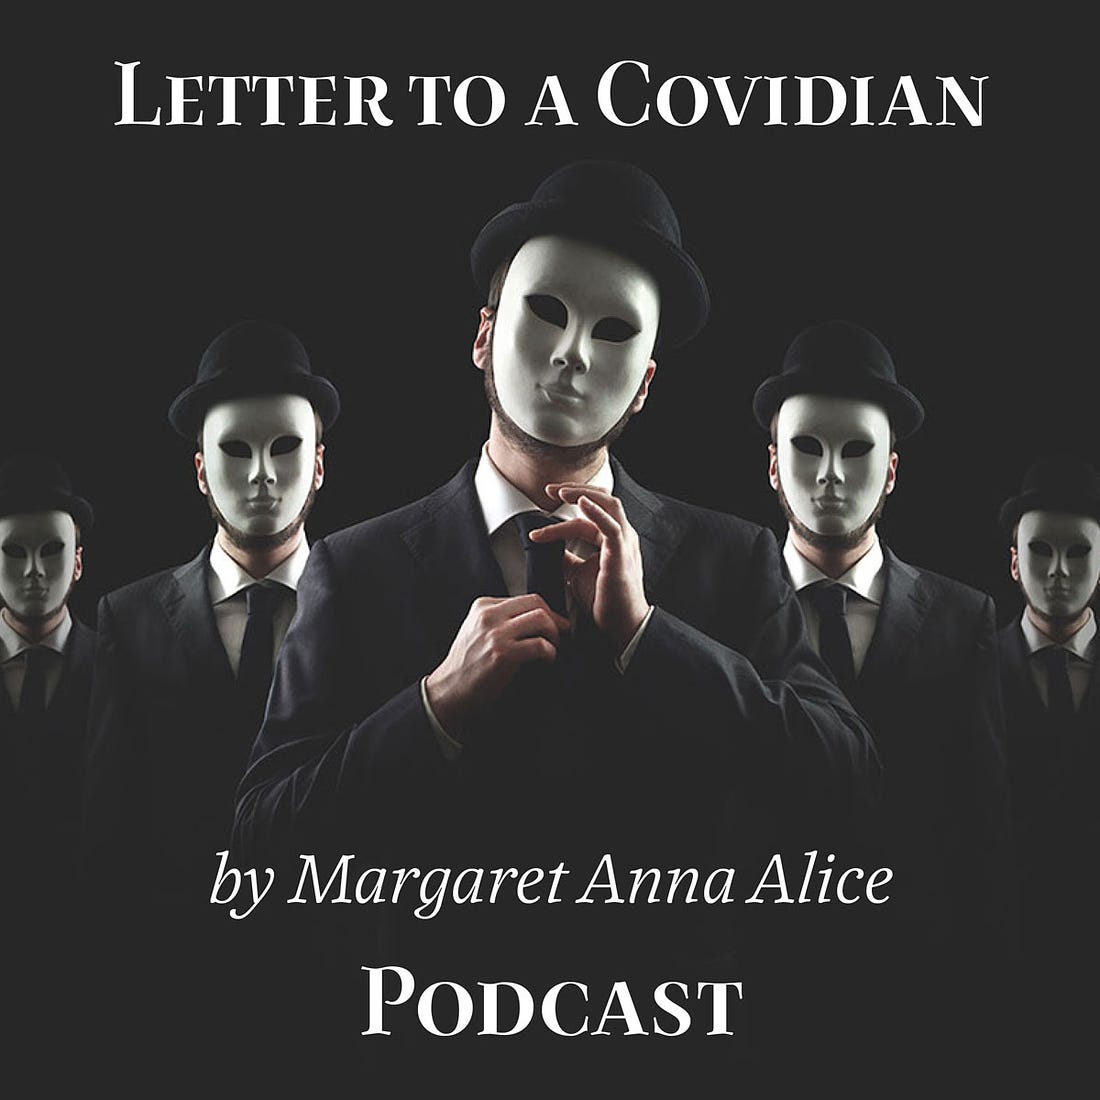 Letter to a Covidian: A Time-Travel Experiment Podcast Artwork; Creepy Masked Cult Members in Suits and Ties